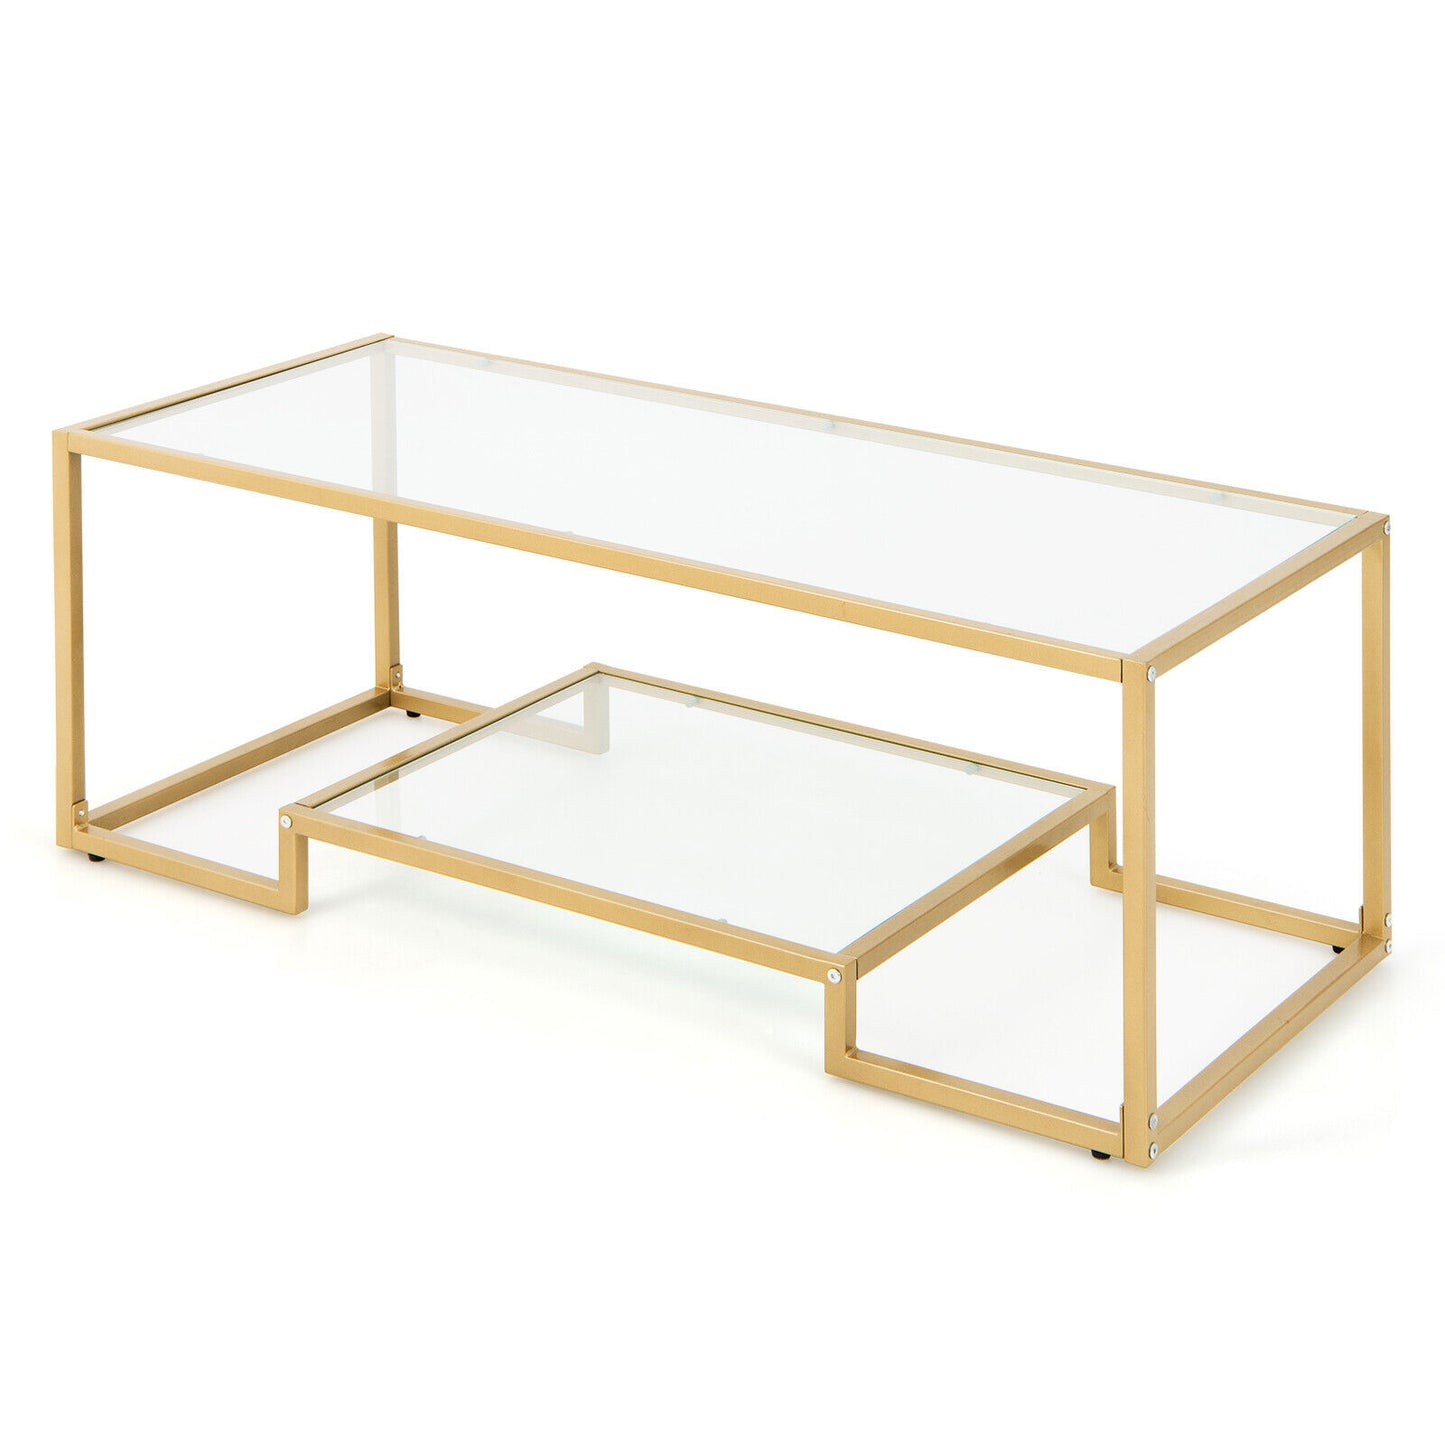 Coffee Table Rectangular Tempered Glass Accent Table Golden Frame Living Room